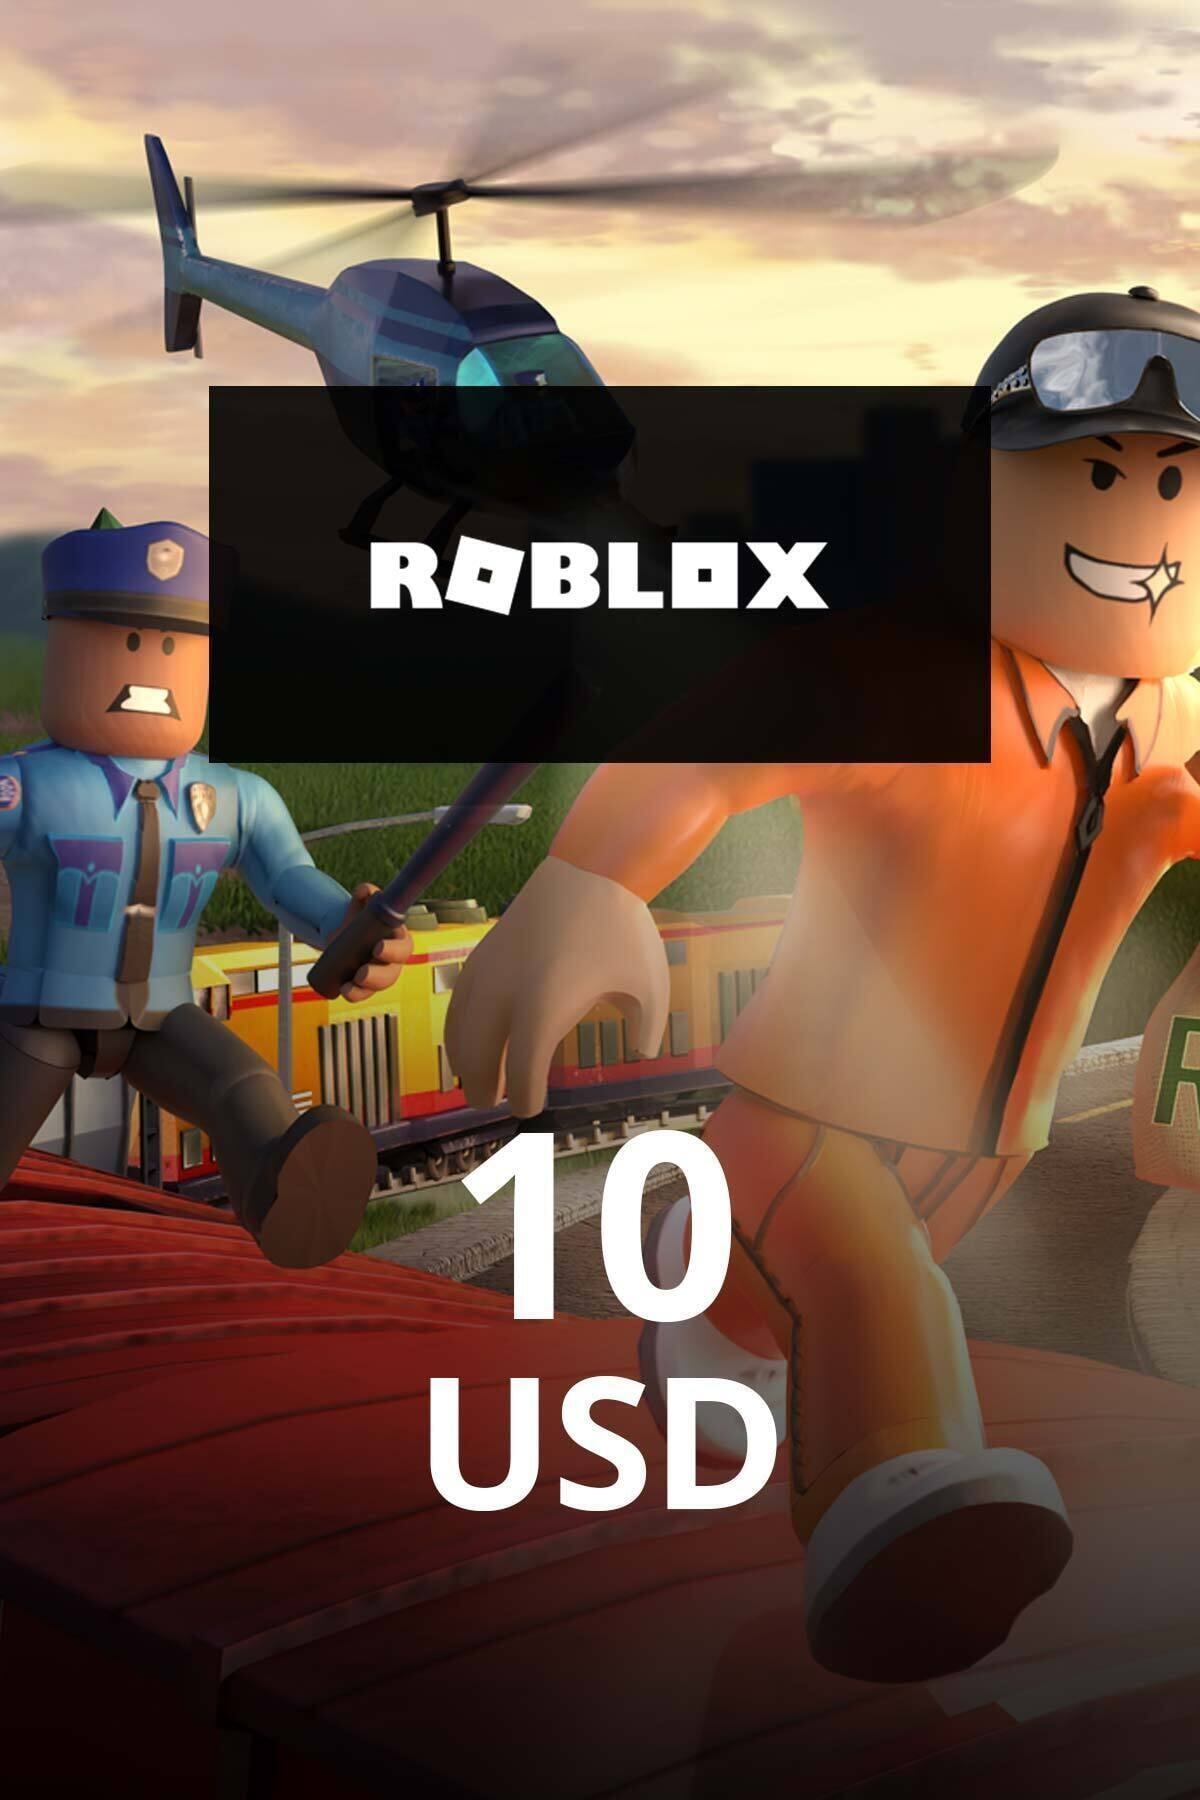 Roblox Gift Card 10 Usd 1100000000423